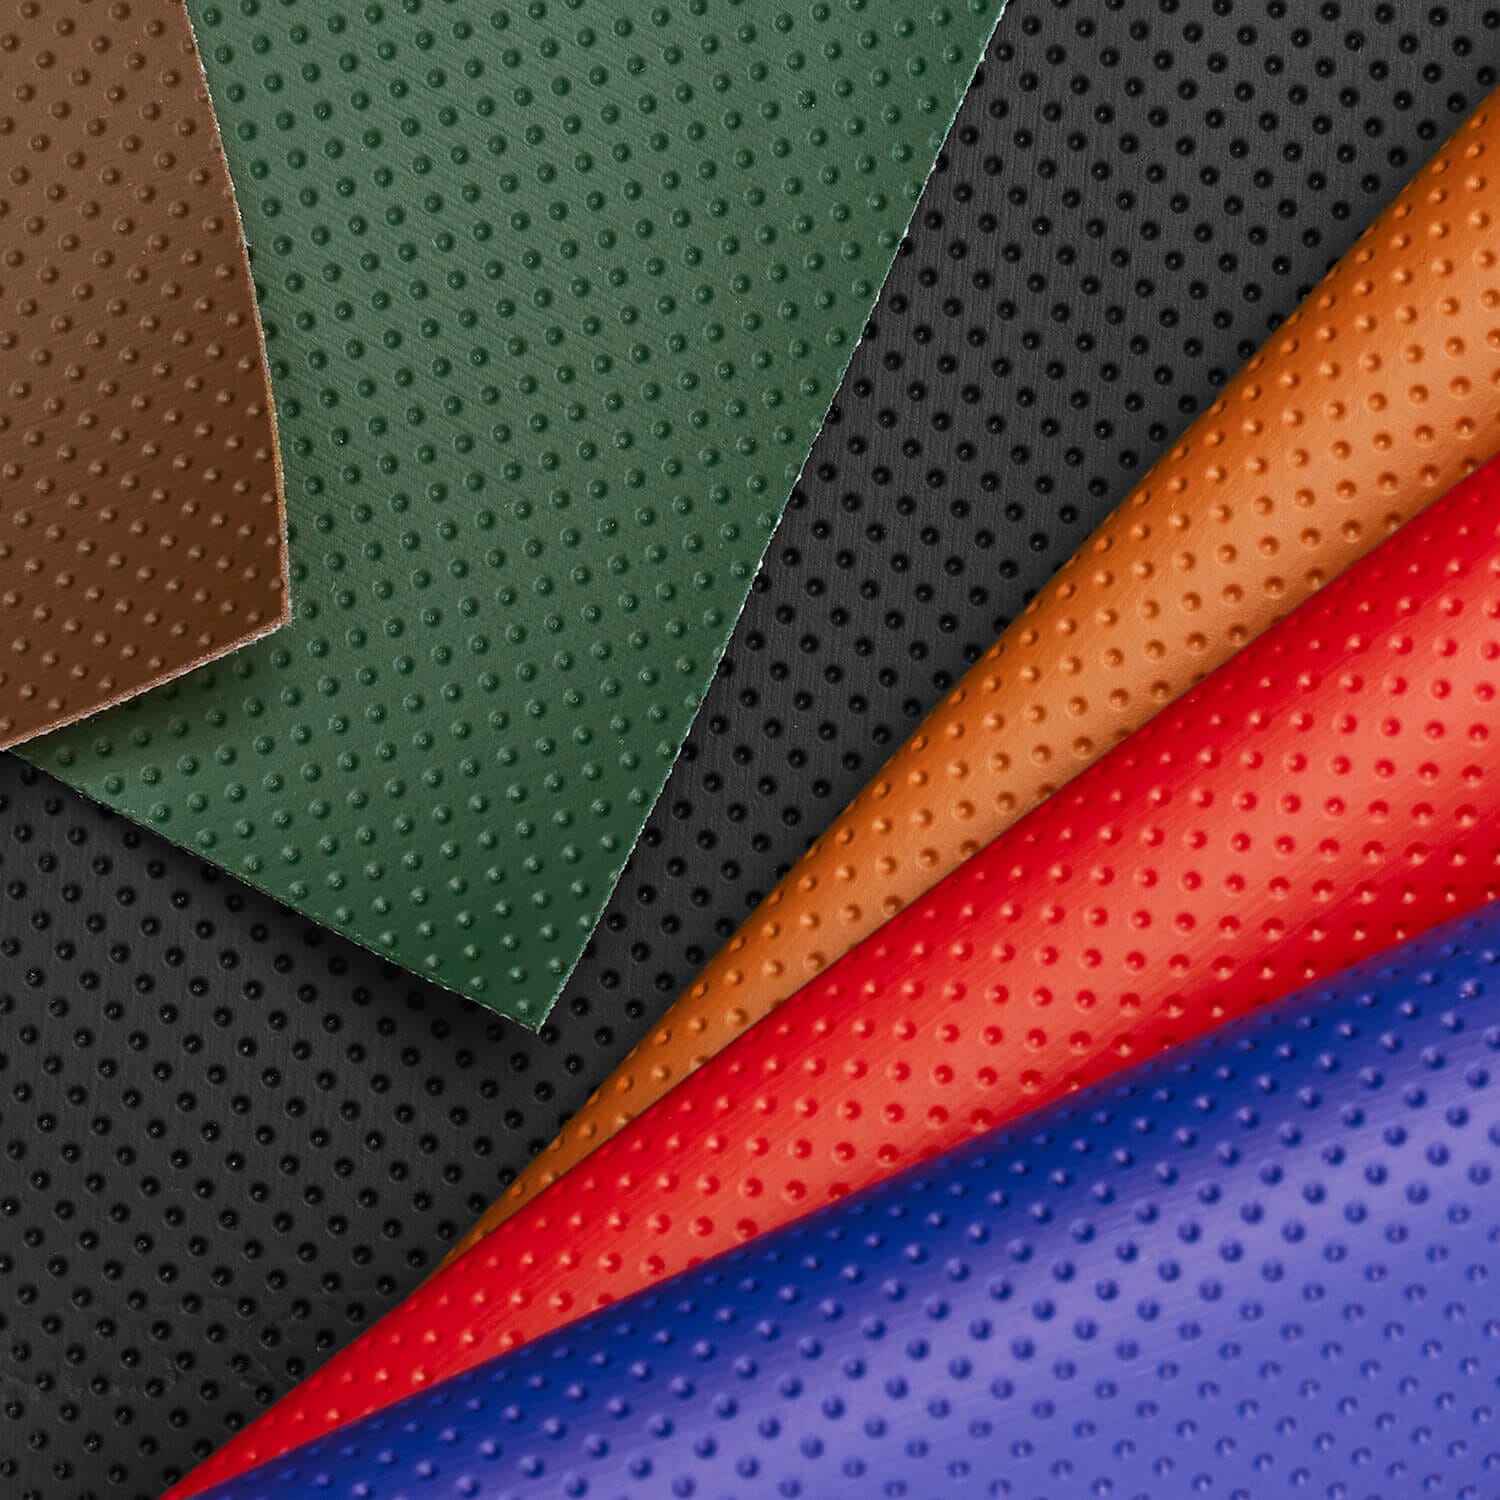 Honeycomb PVC Leather Fabric Plush Back Elastic Upholstery Leather Material